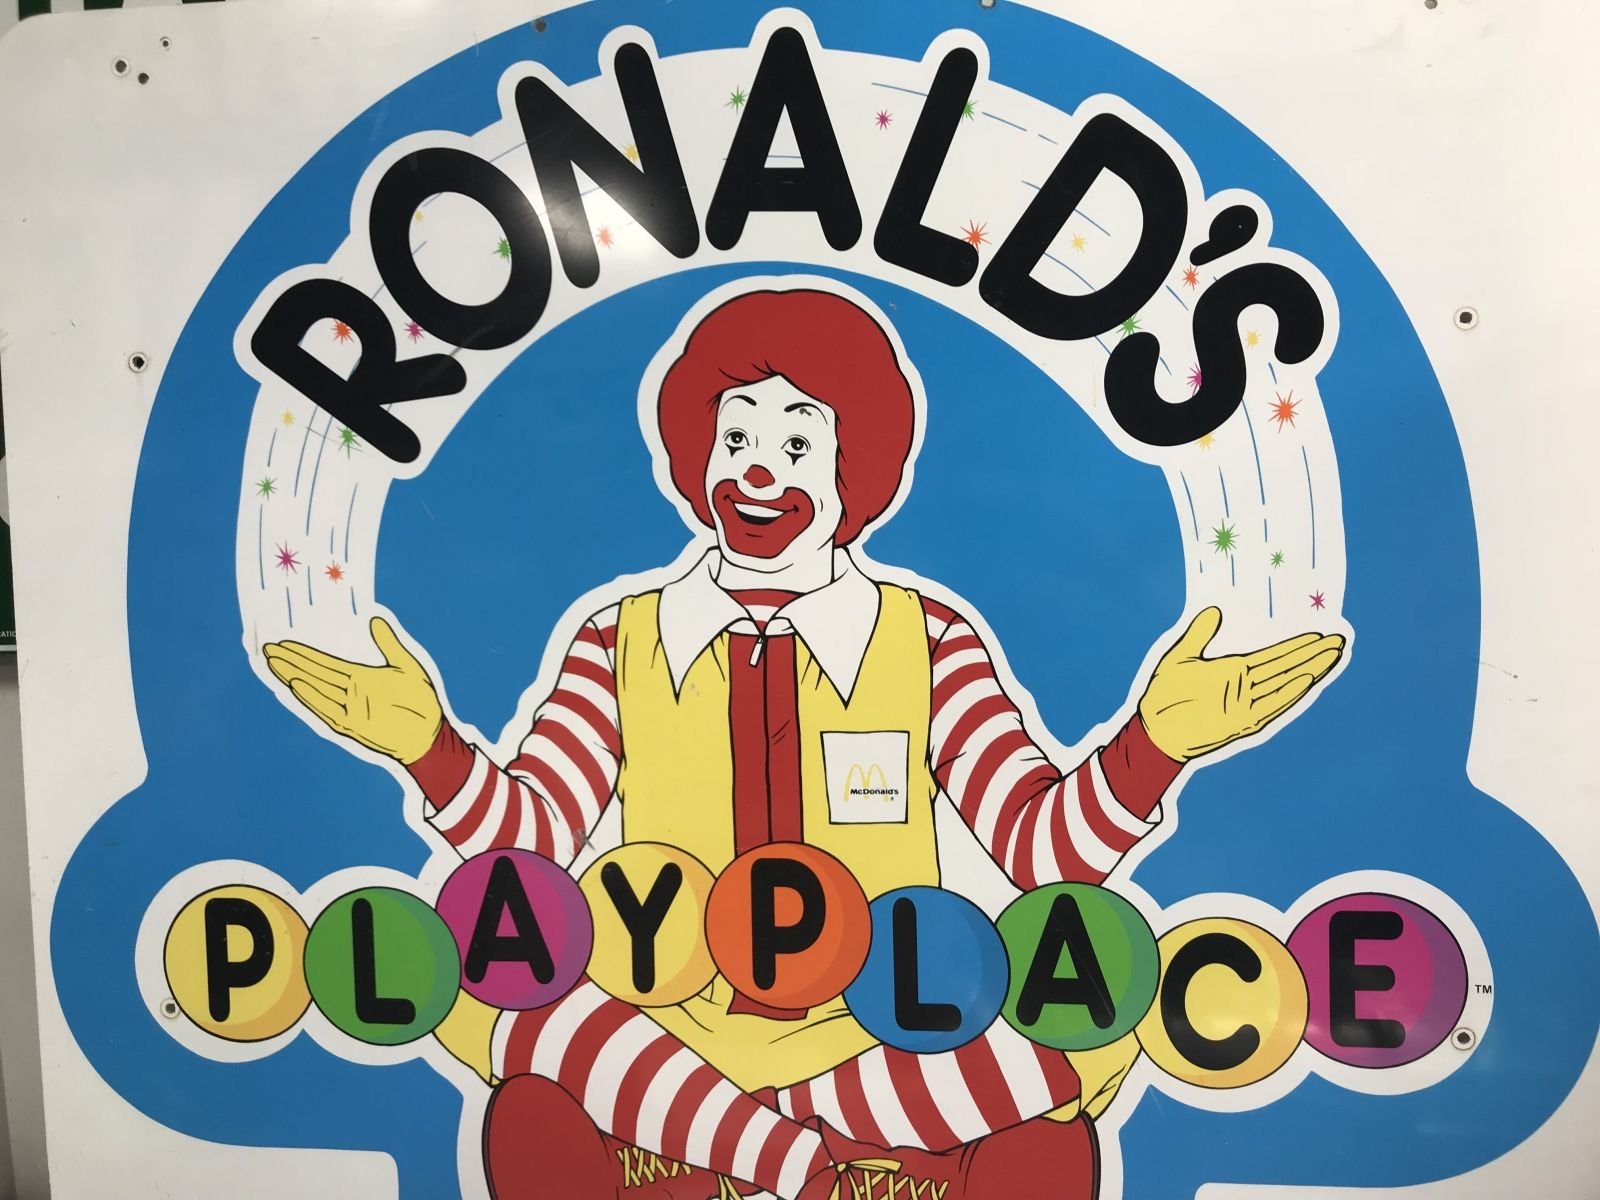 RONALD'S PLAYPLACE SIGN